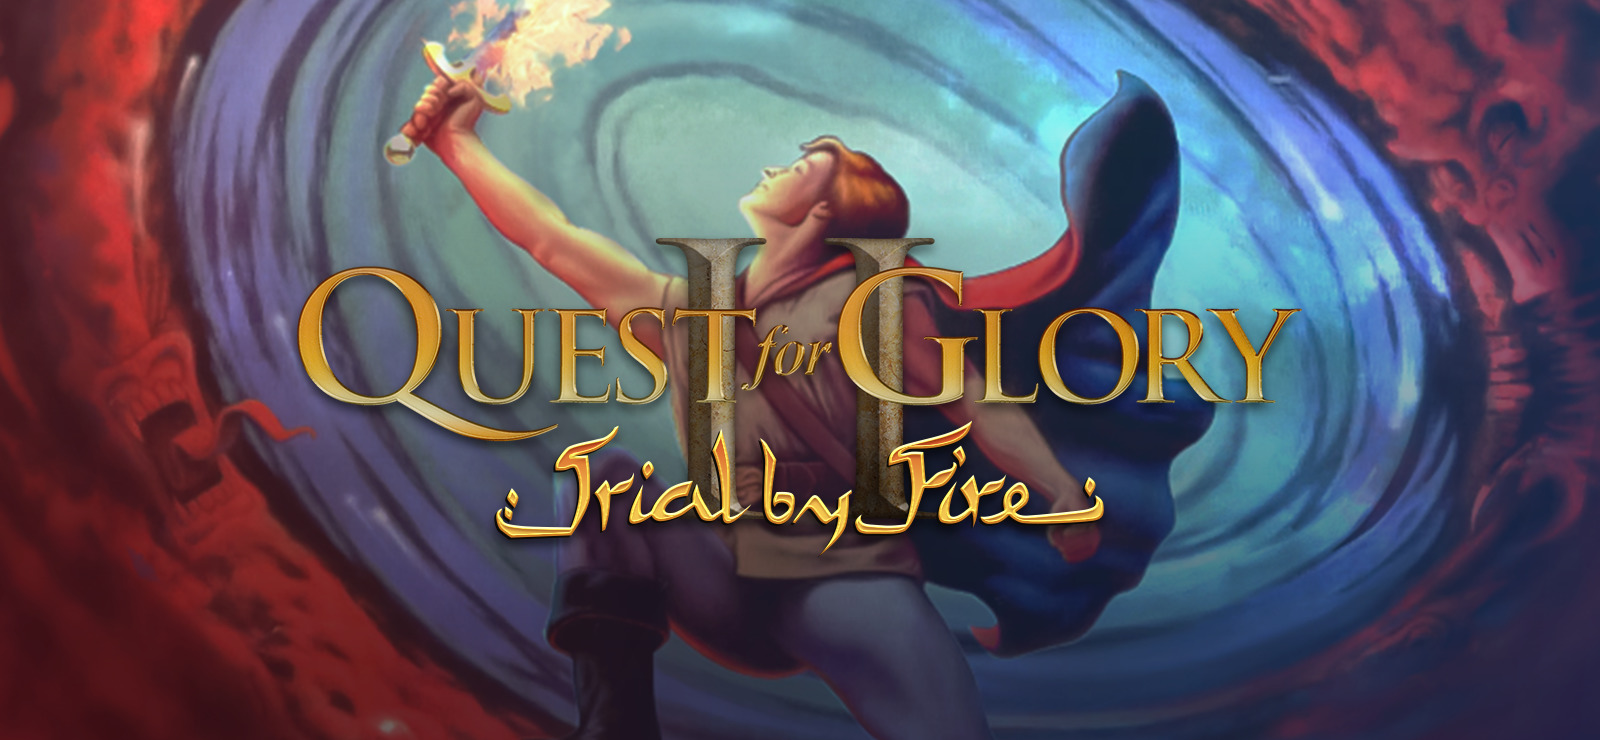 quest-for-glory-ii-trial-by-fire-details-launchbox-games-database